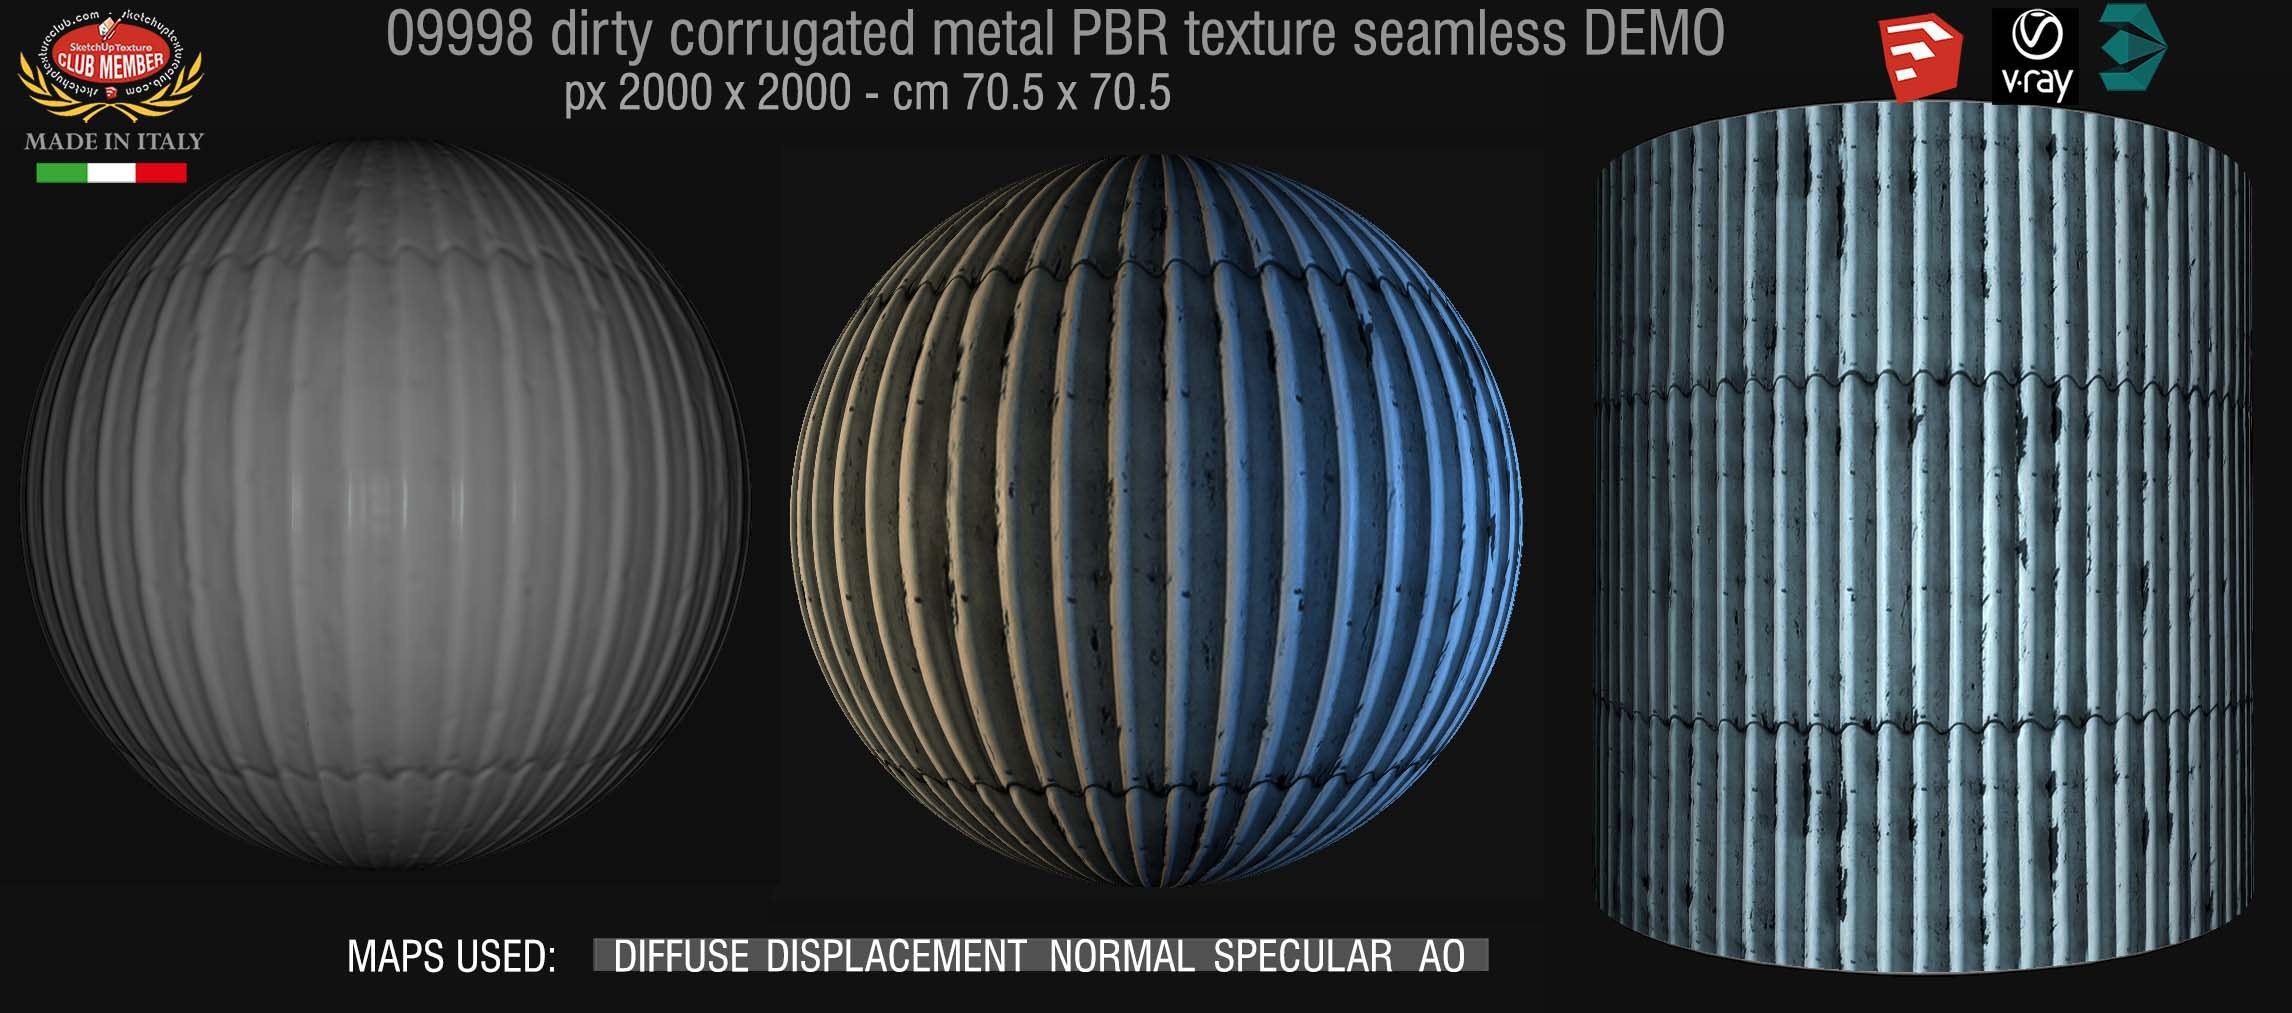 09998 Dirty corrugated metal PBR texture seamless DEMO